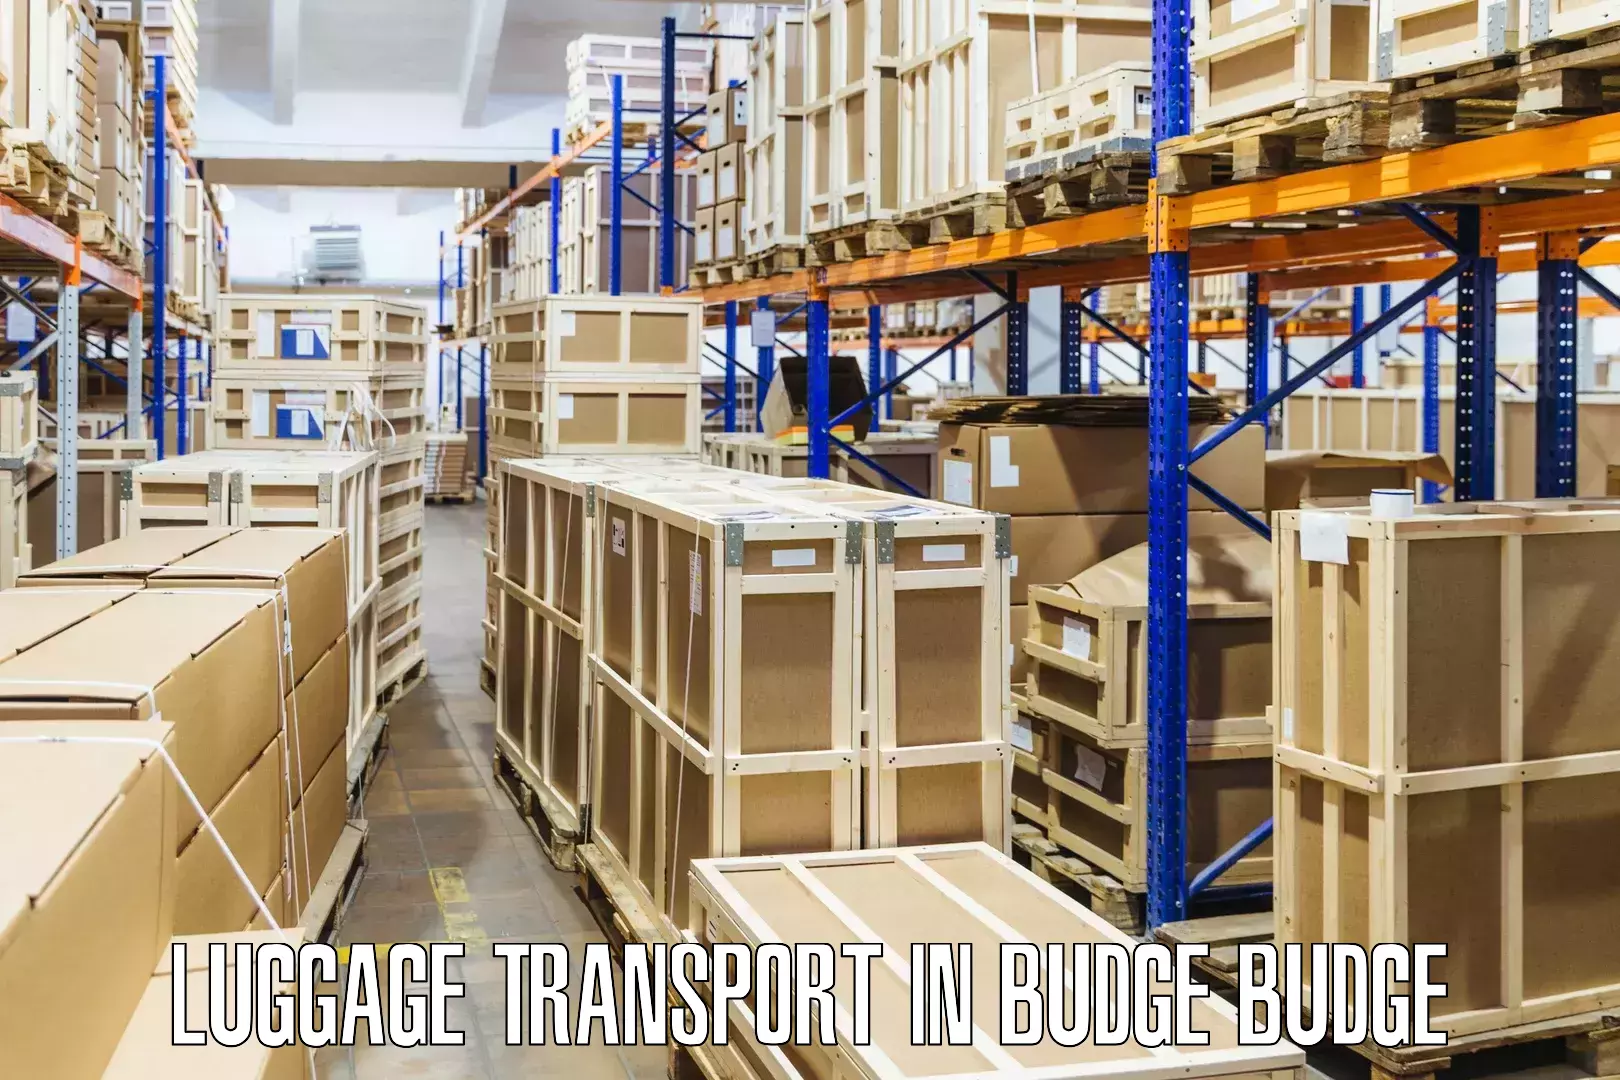 Emergency baggage service in Budge Budge